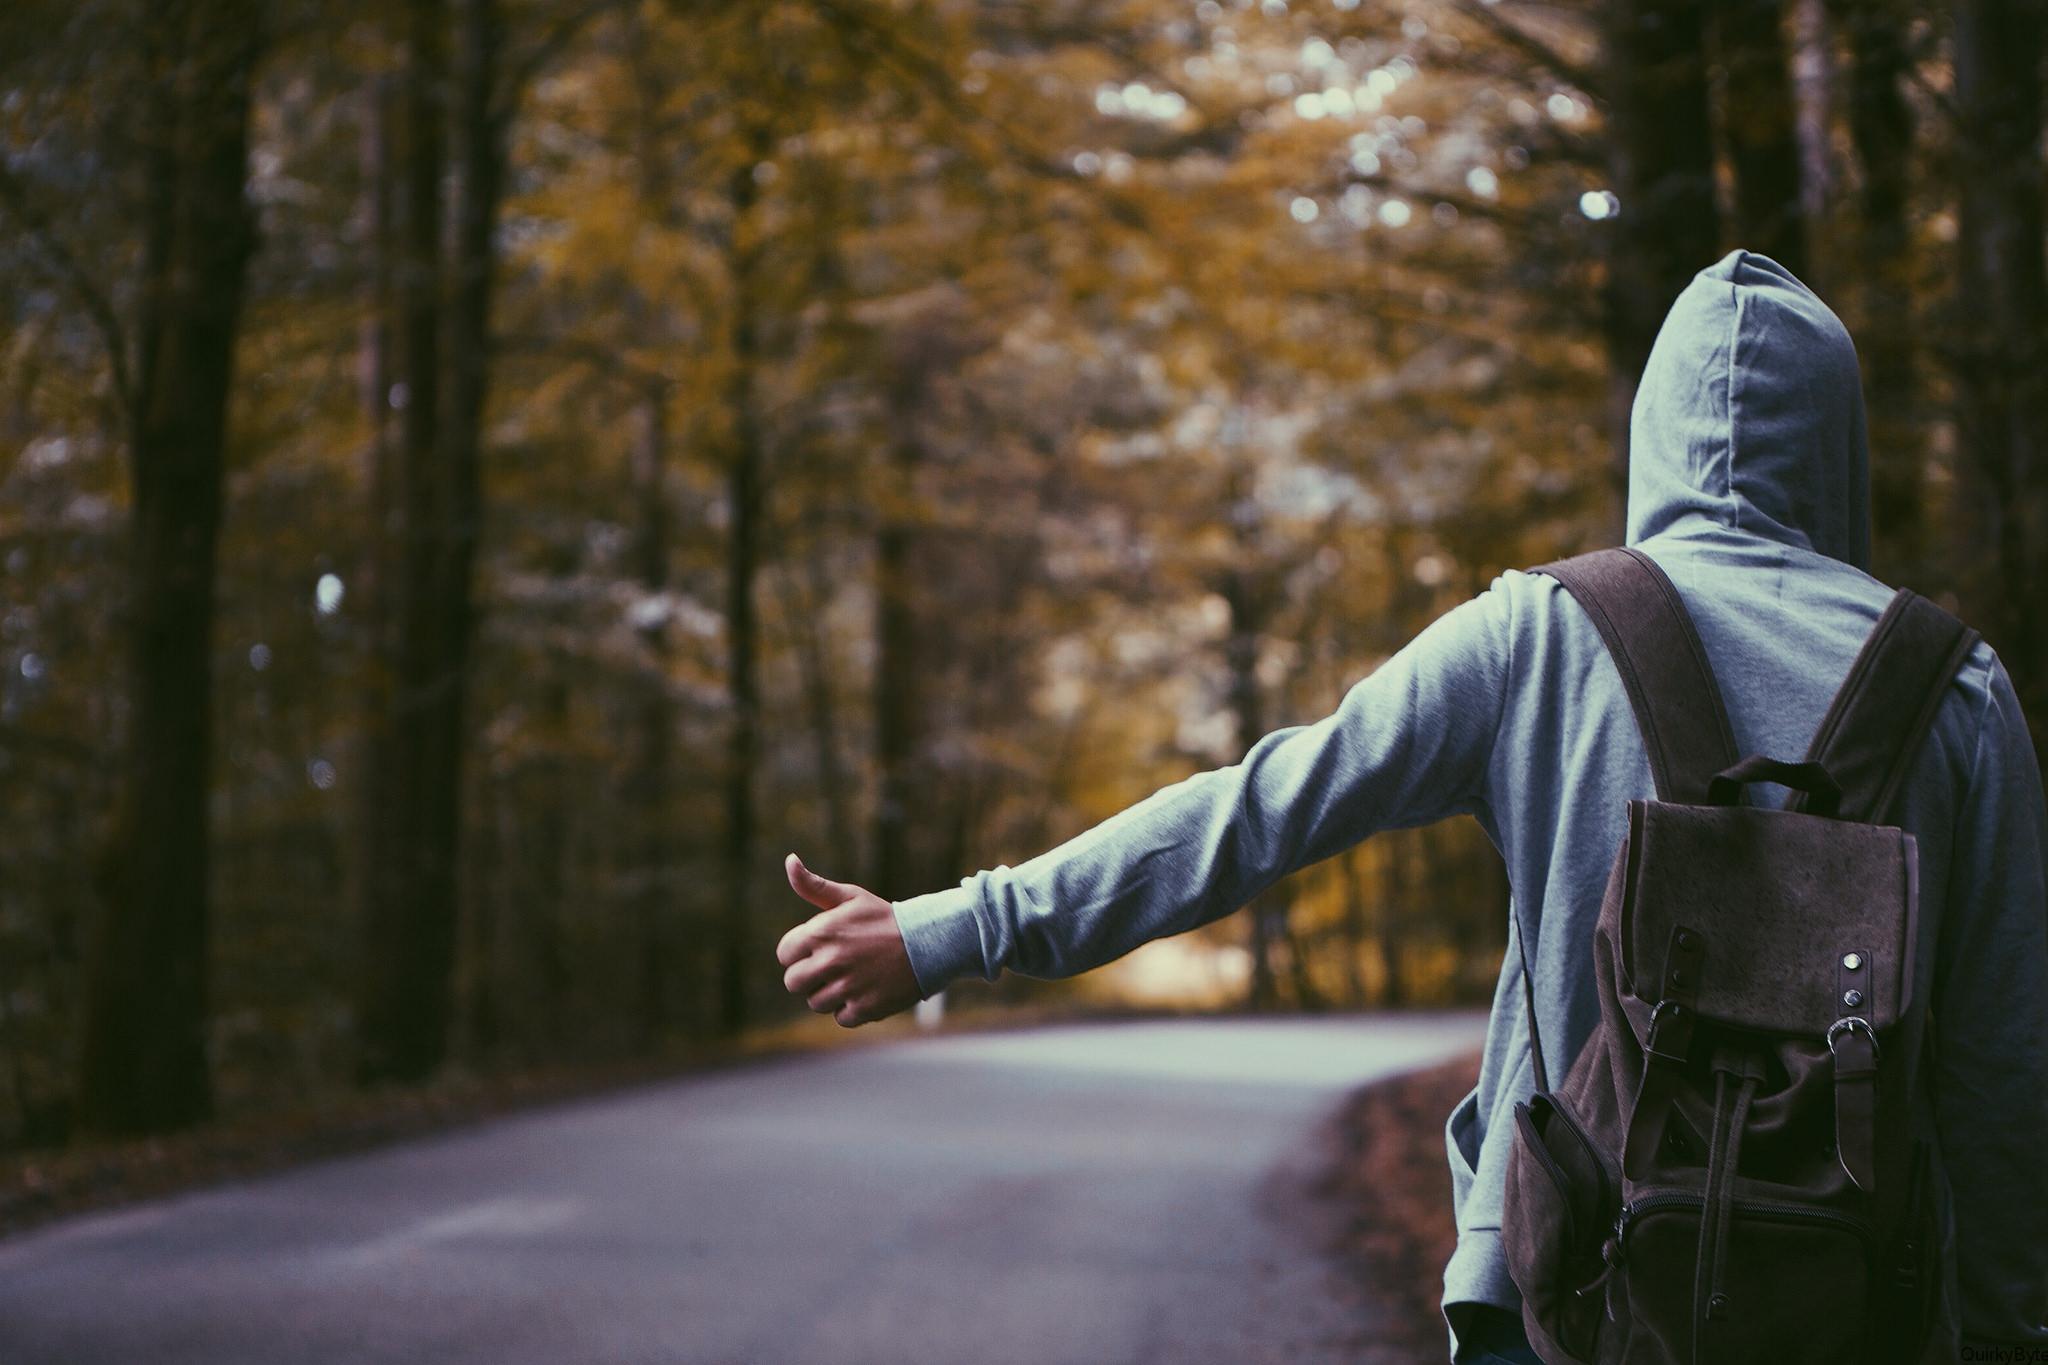 Tips for a future hitchhiker